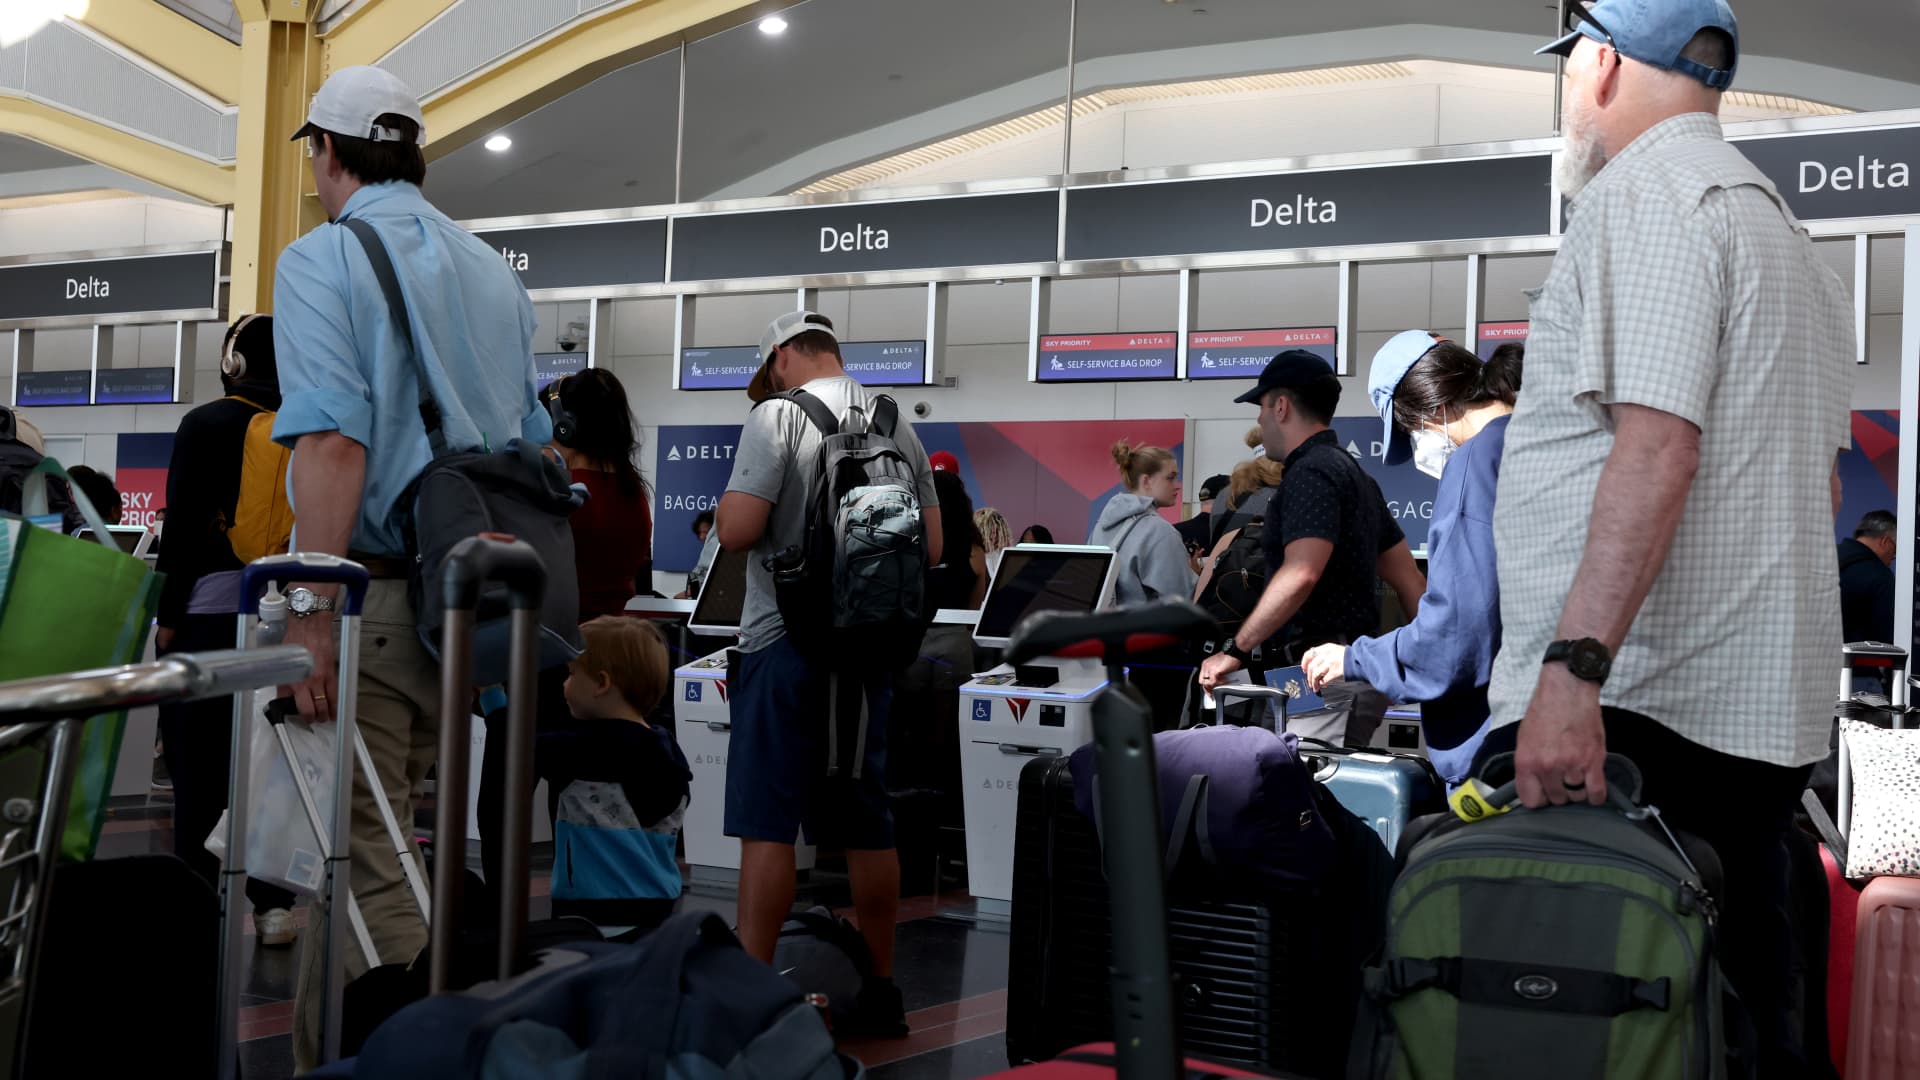 Delta cancels more flights, struggles to recover from Microsoft outage [Video]